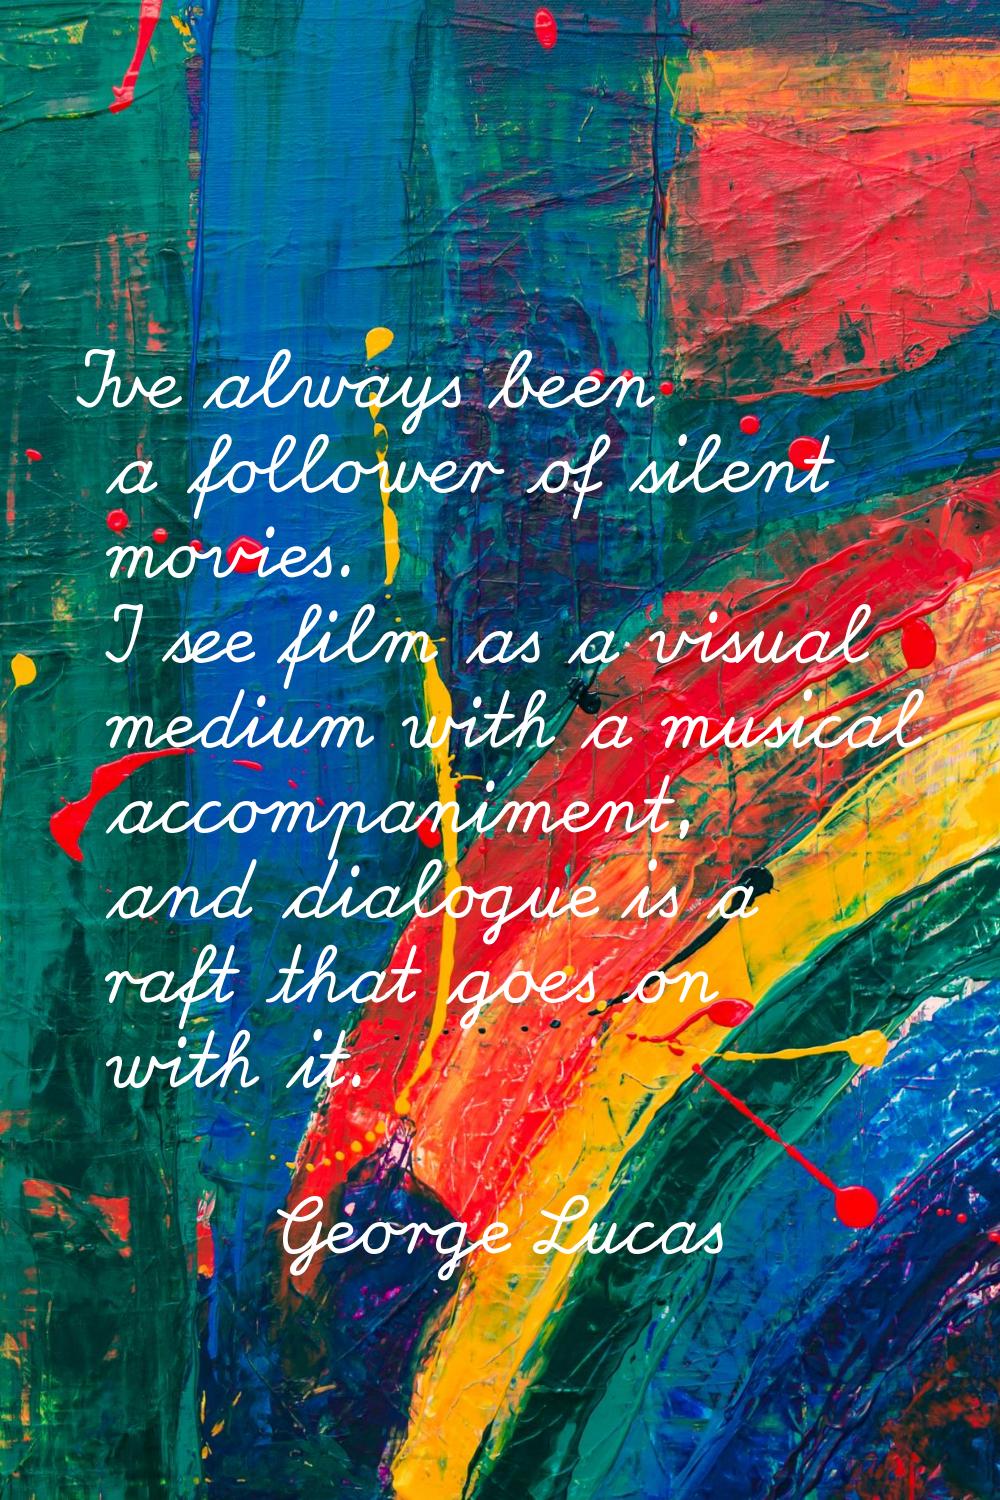 I've always been a follower of silent movies. I see film as a visual medium with a musical accompan